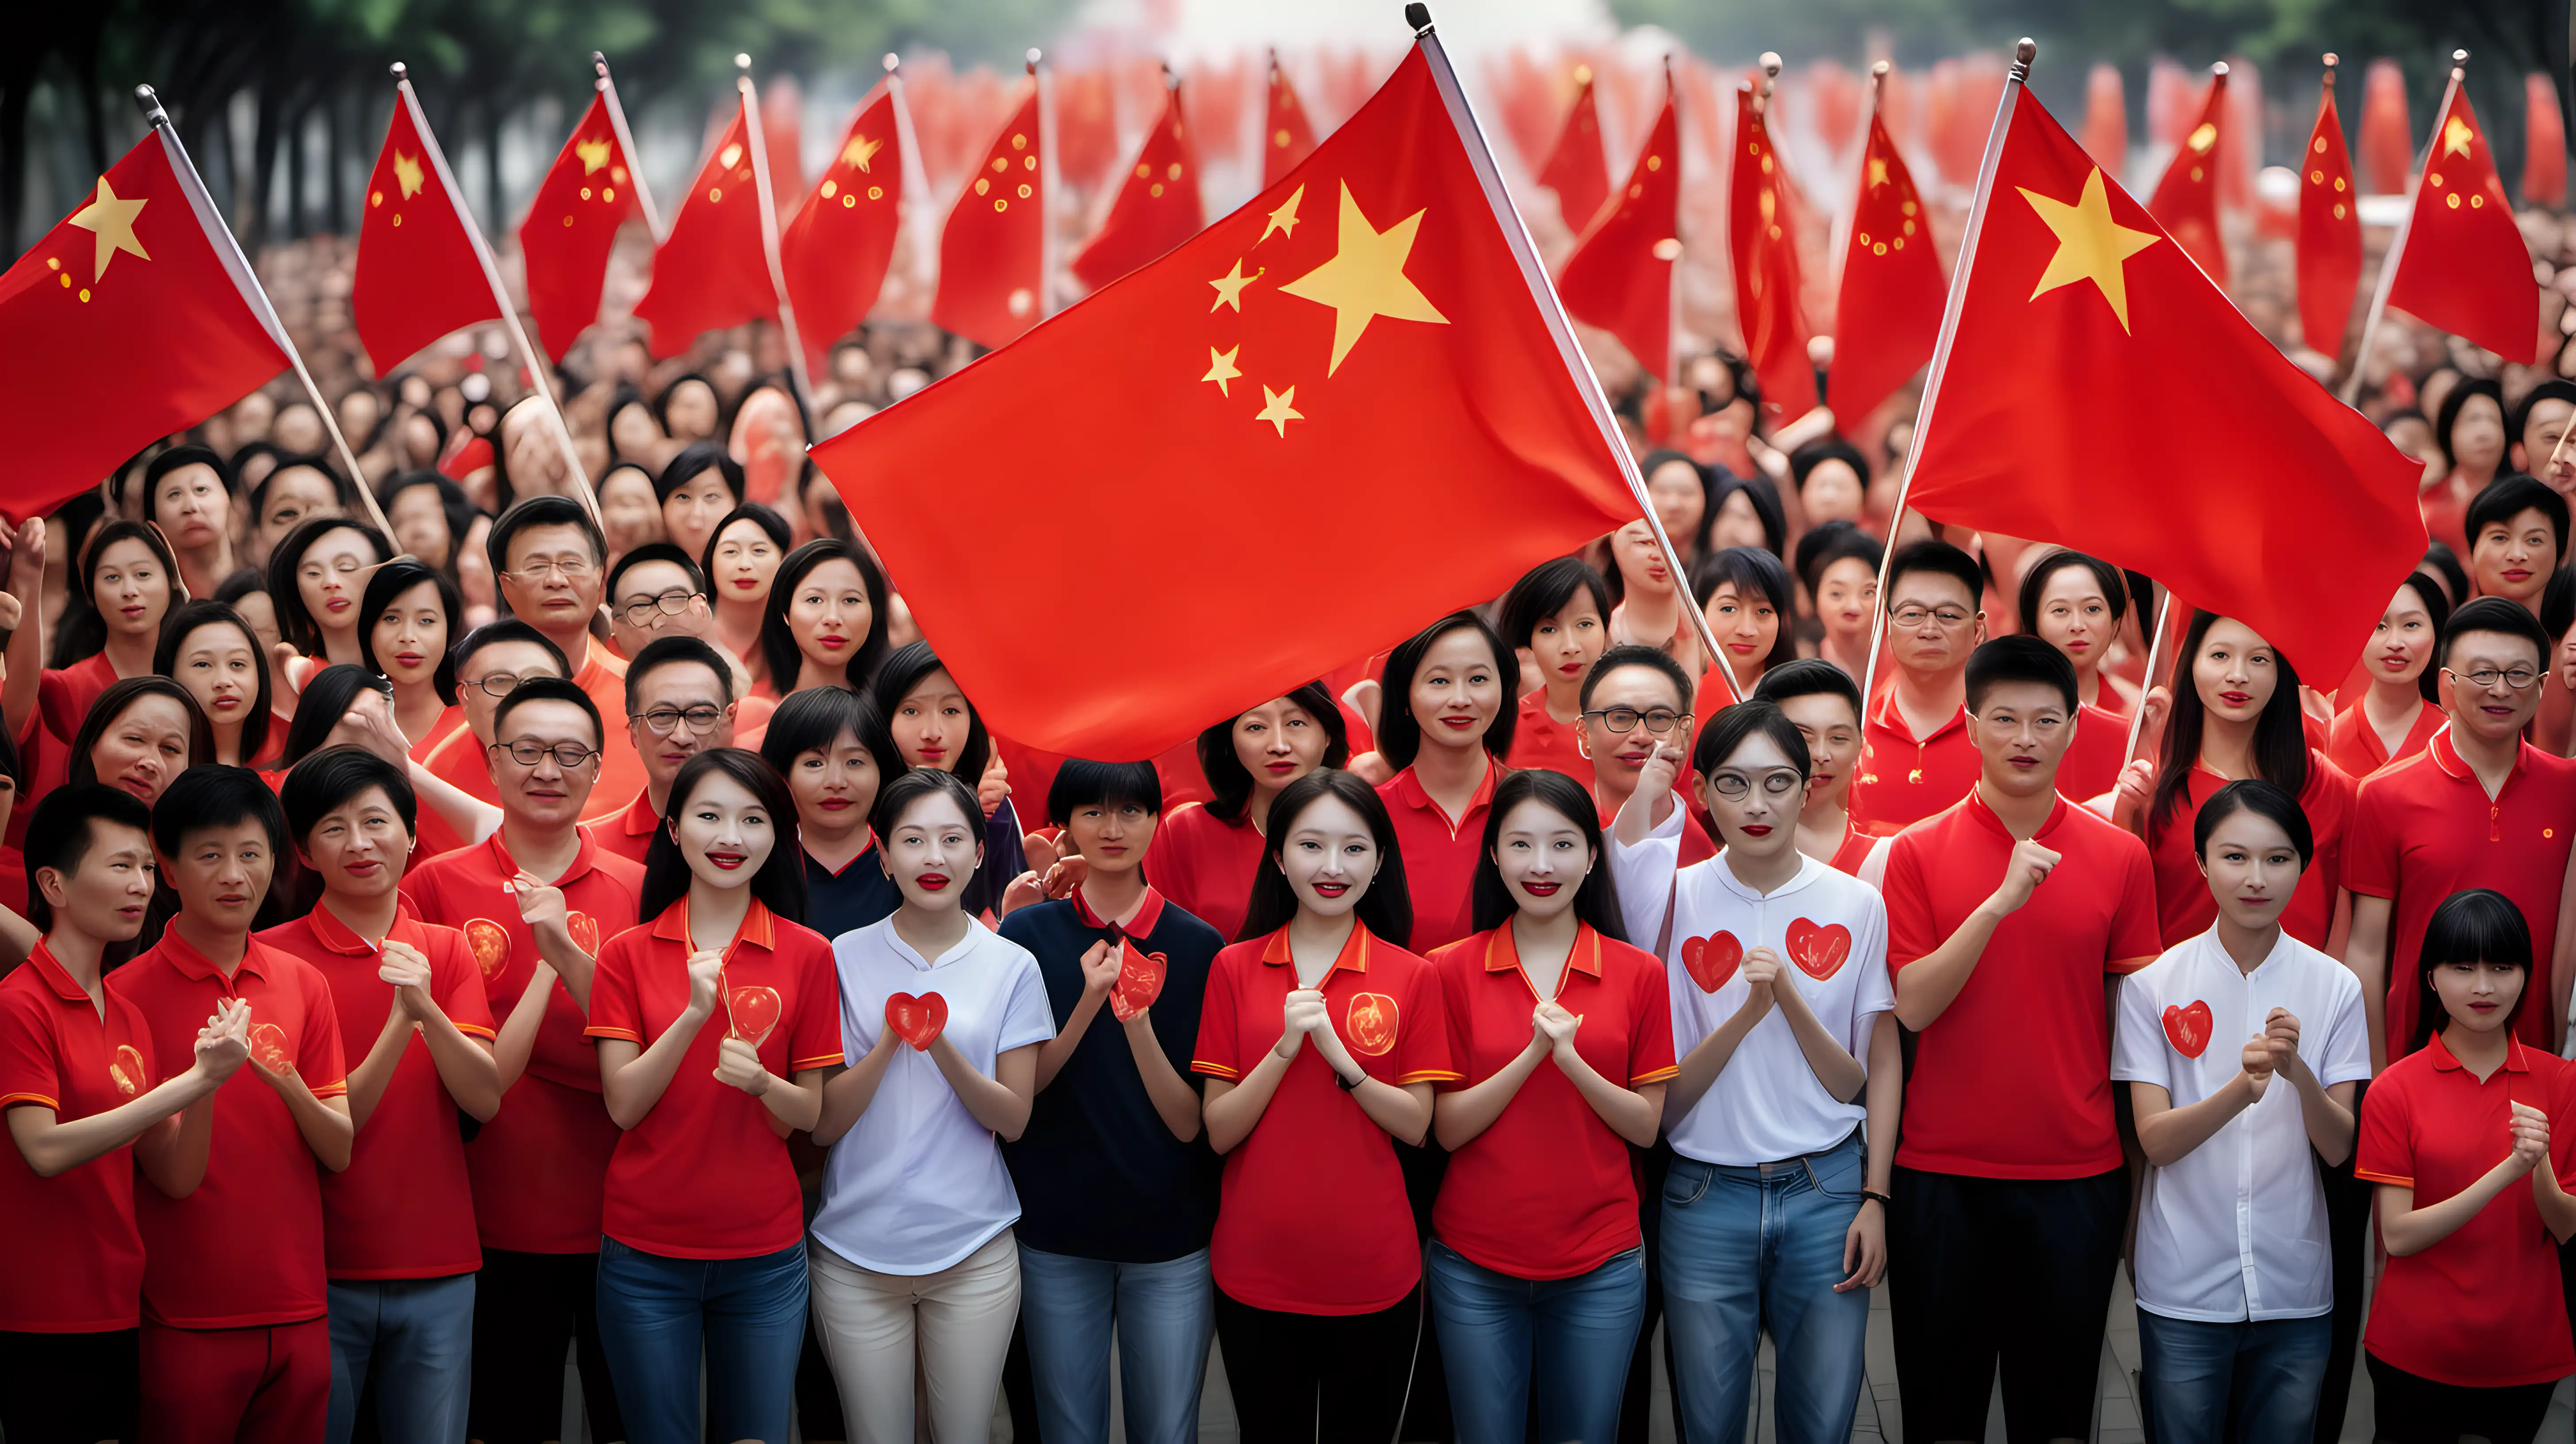 Diverse Patriots Unite Celebrating Unity with Chinese Flag